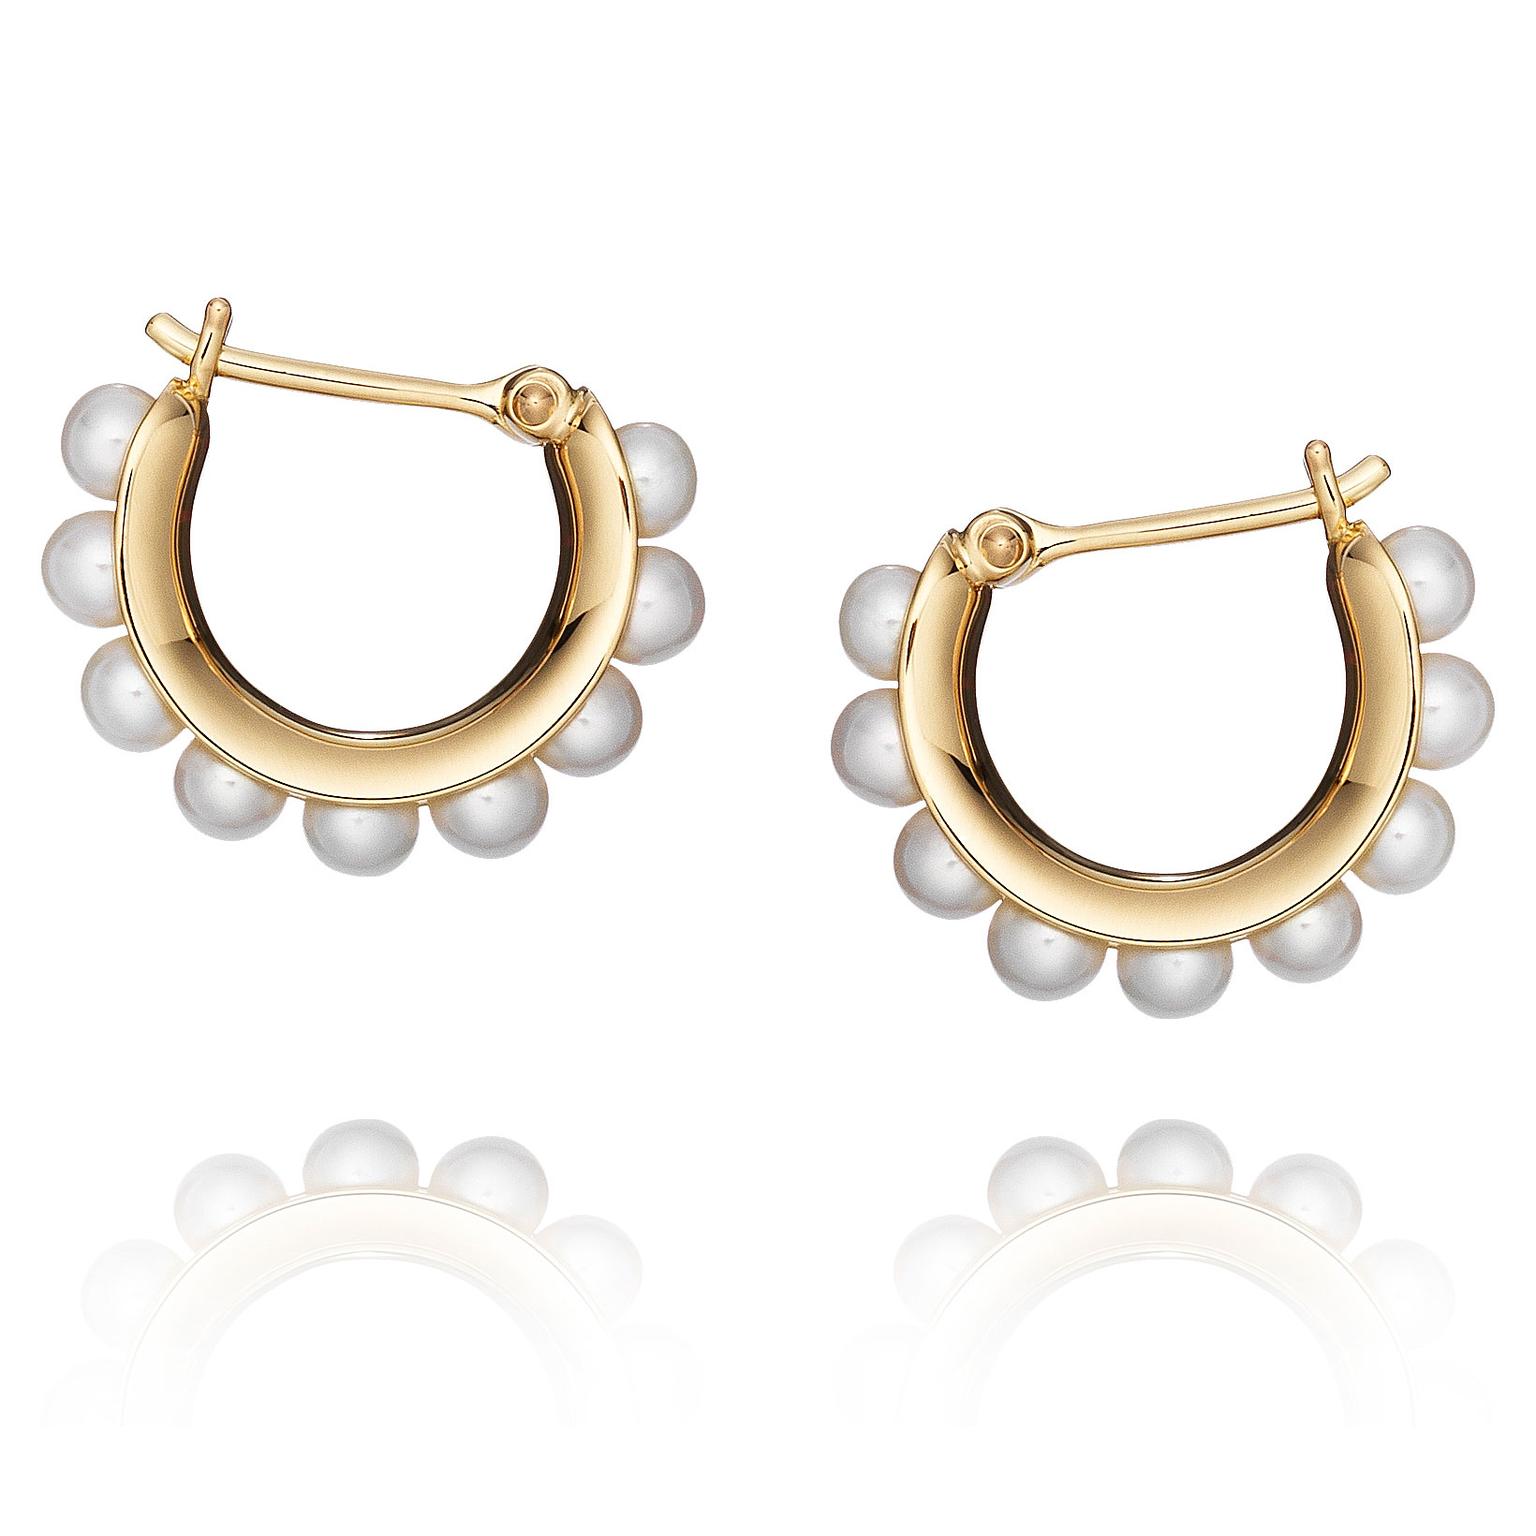 Melanie Georgacopoulos pearl earrings in 18ct yellow gold set with 3mm white Freshwater pearls